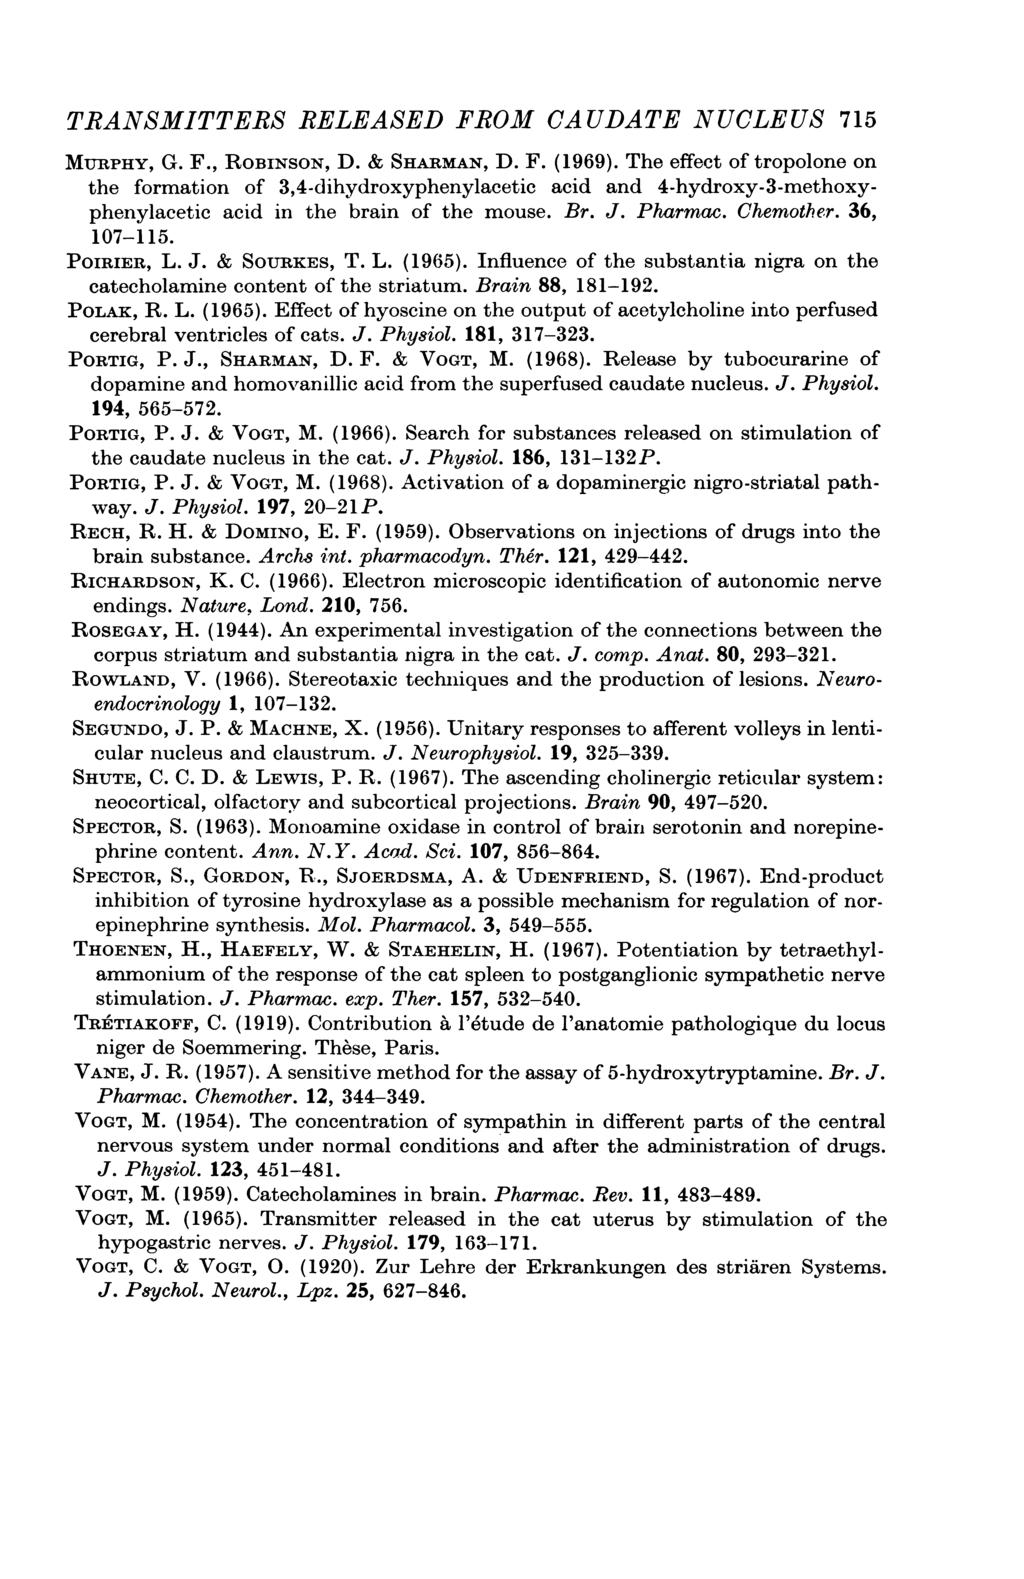 TRANSMITTERS RELEASED FROM CAUDATE NUCLEUS 715 MURPHY, G. F., ROBINSON, D. & SHARMAN, D. F. (1969).